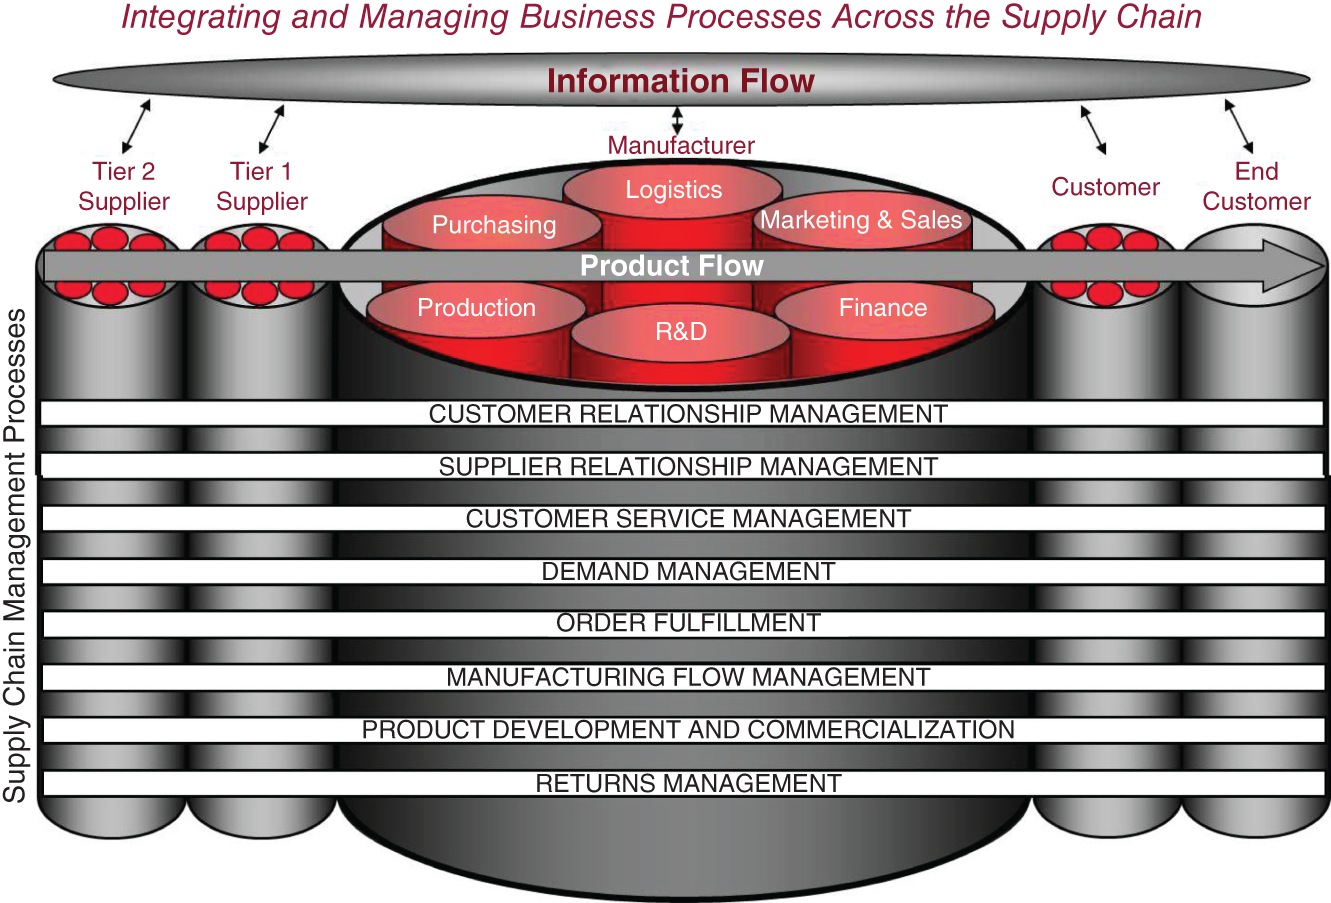 Schematic illustration of Supply Chain Framework and Processes.